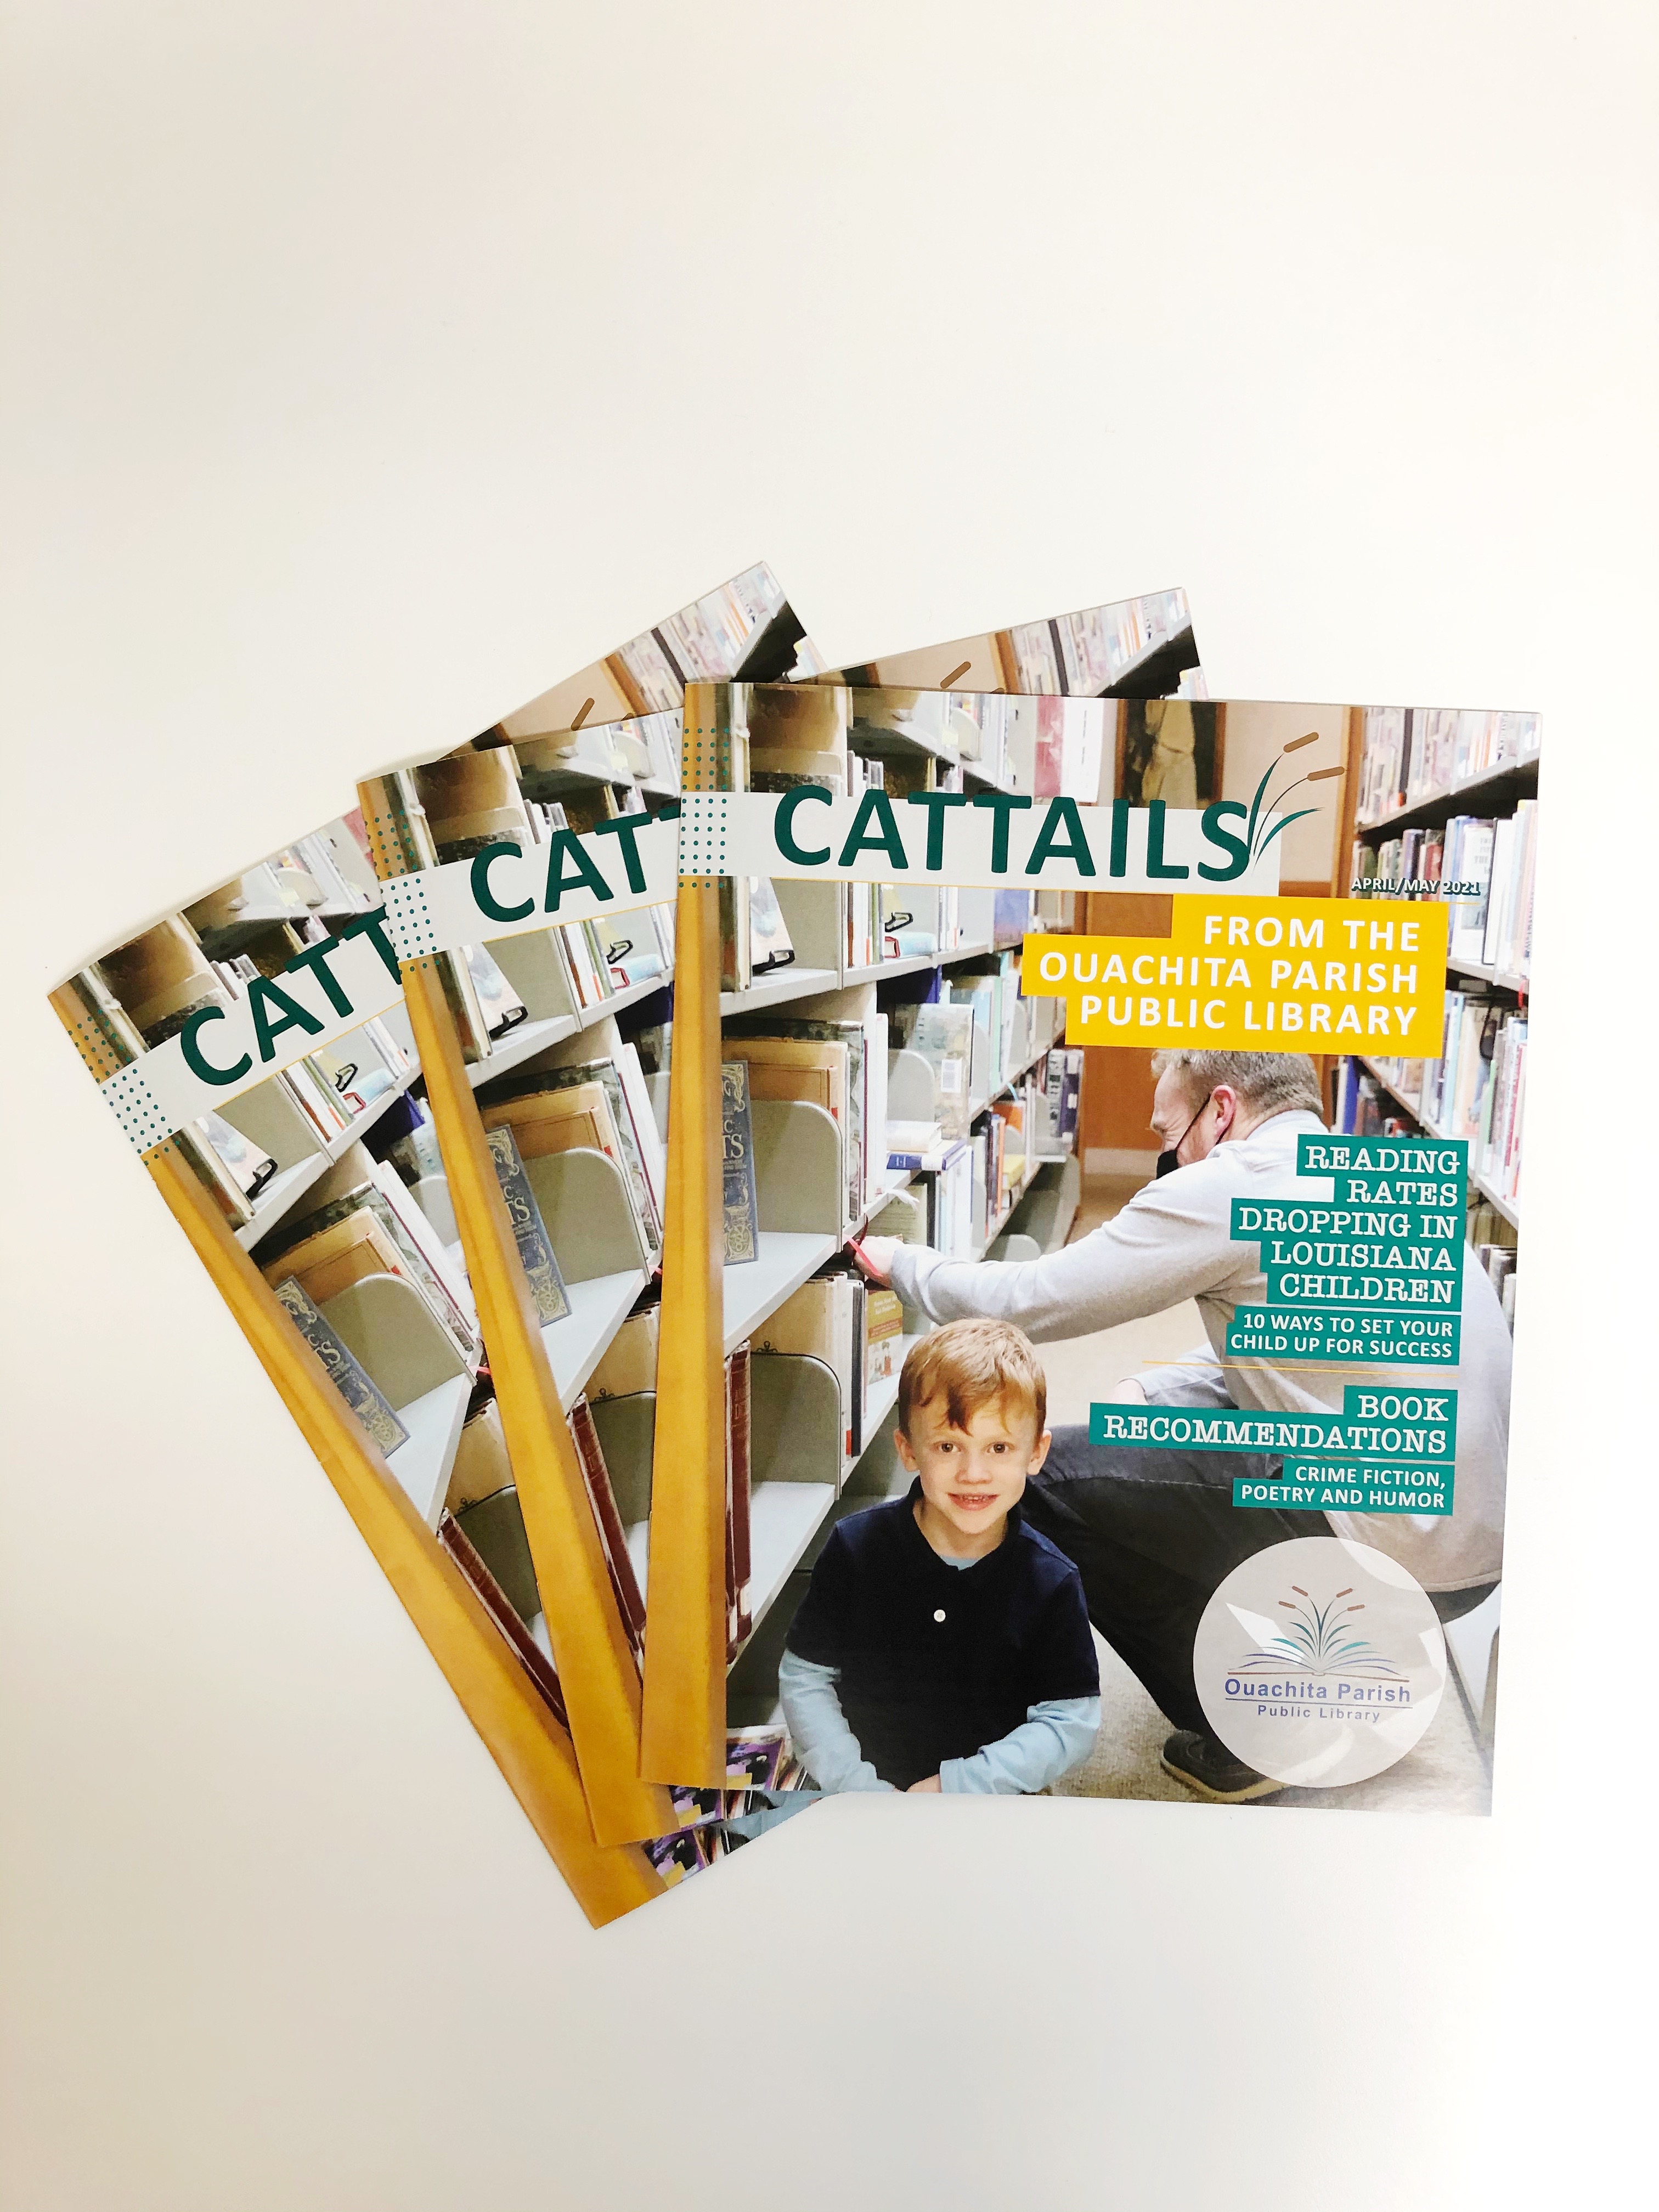 Three issues of the April/May Cattails lay on a white table.